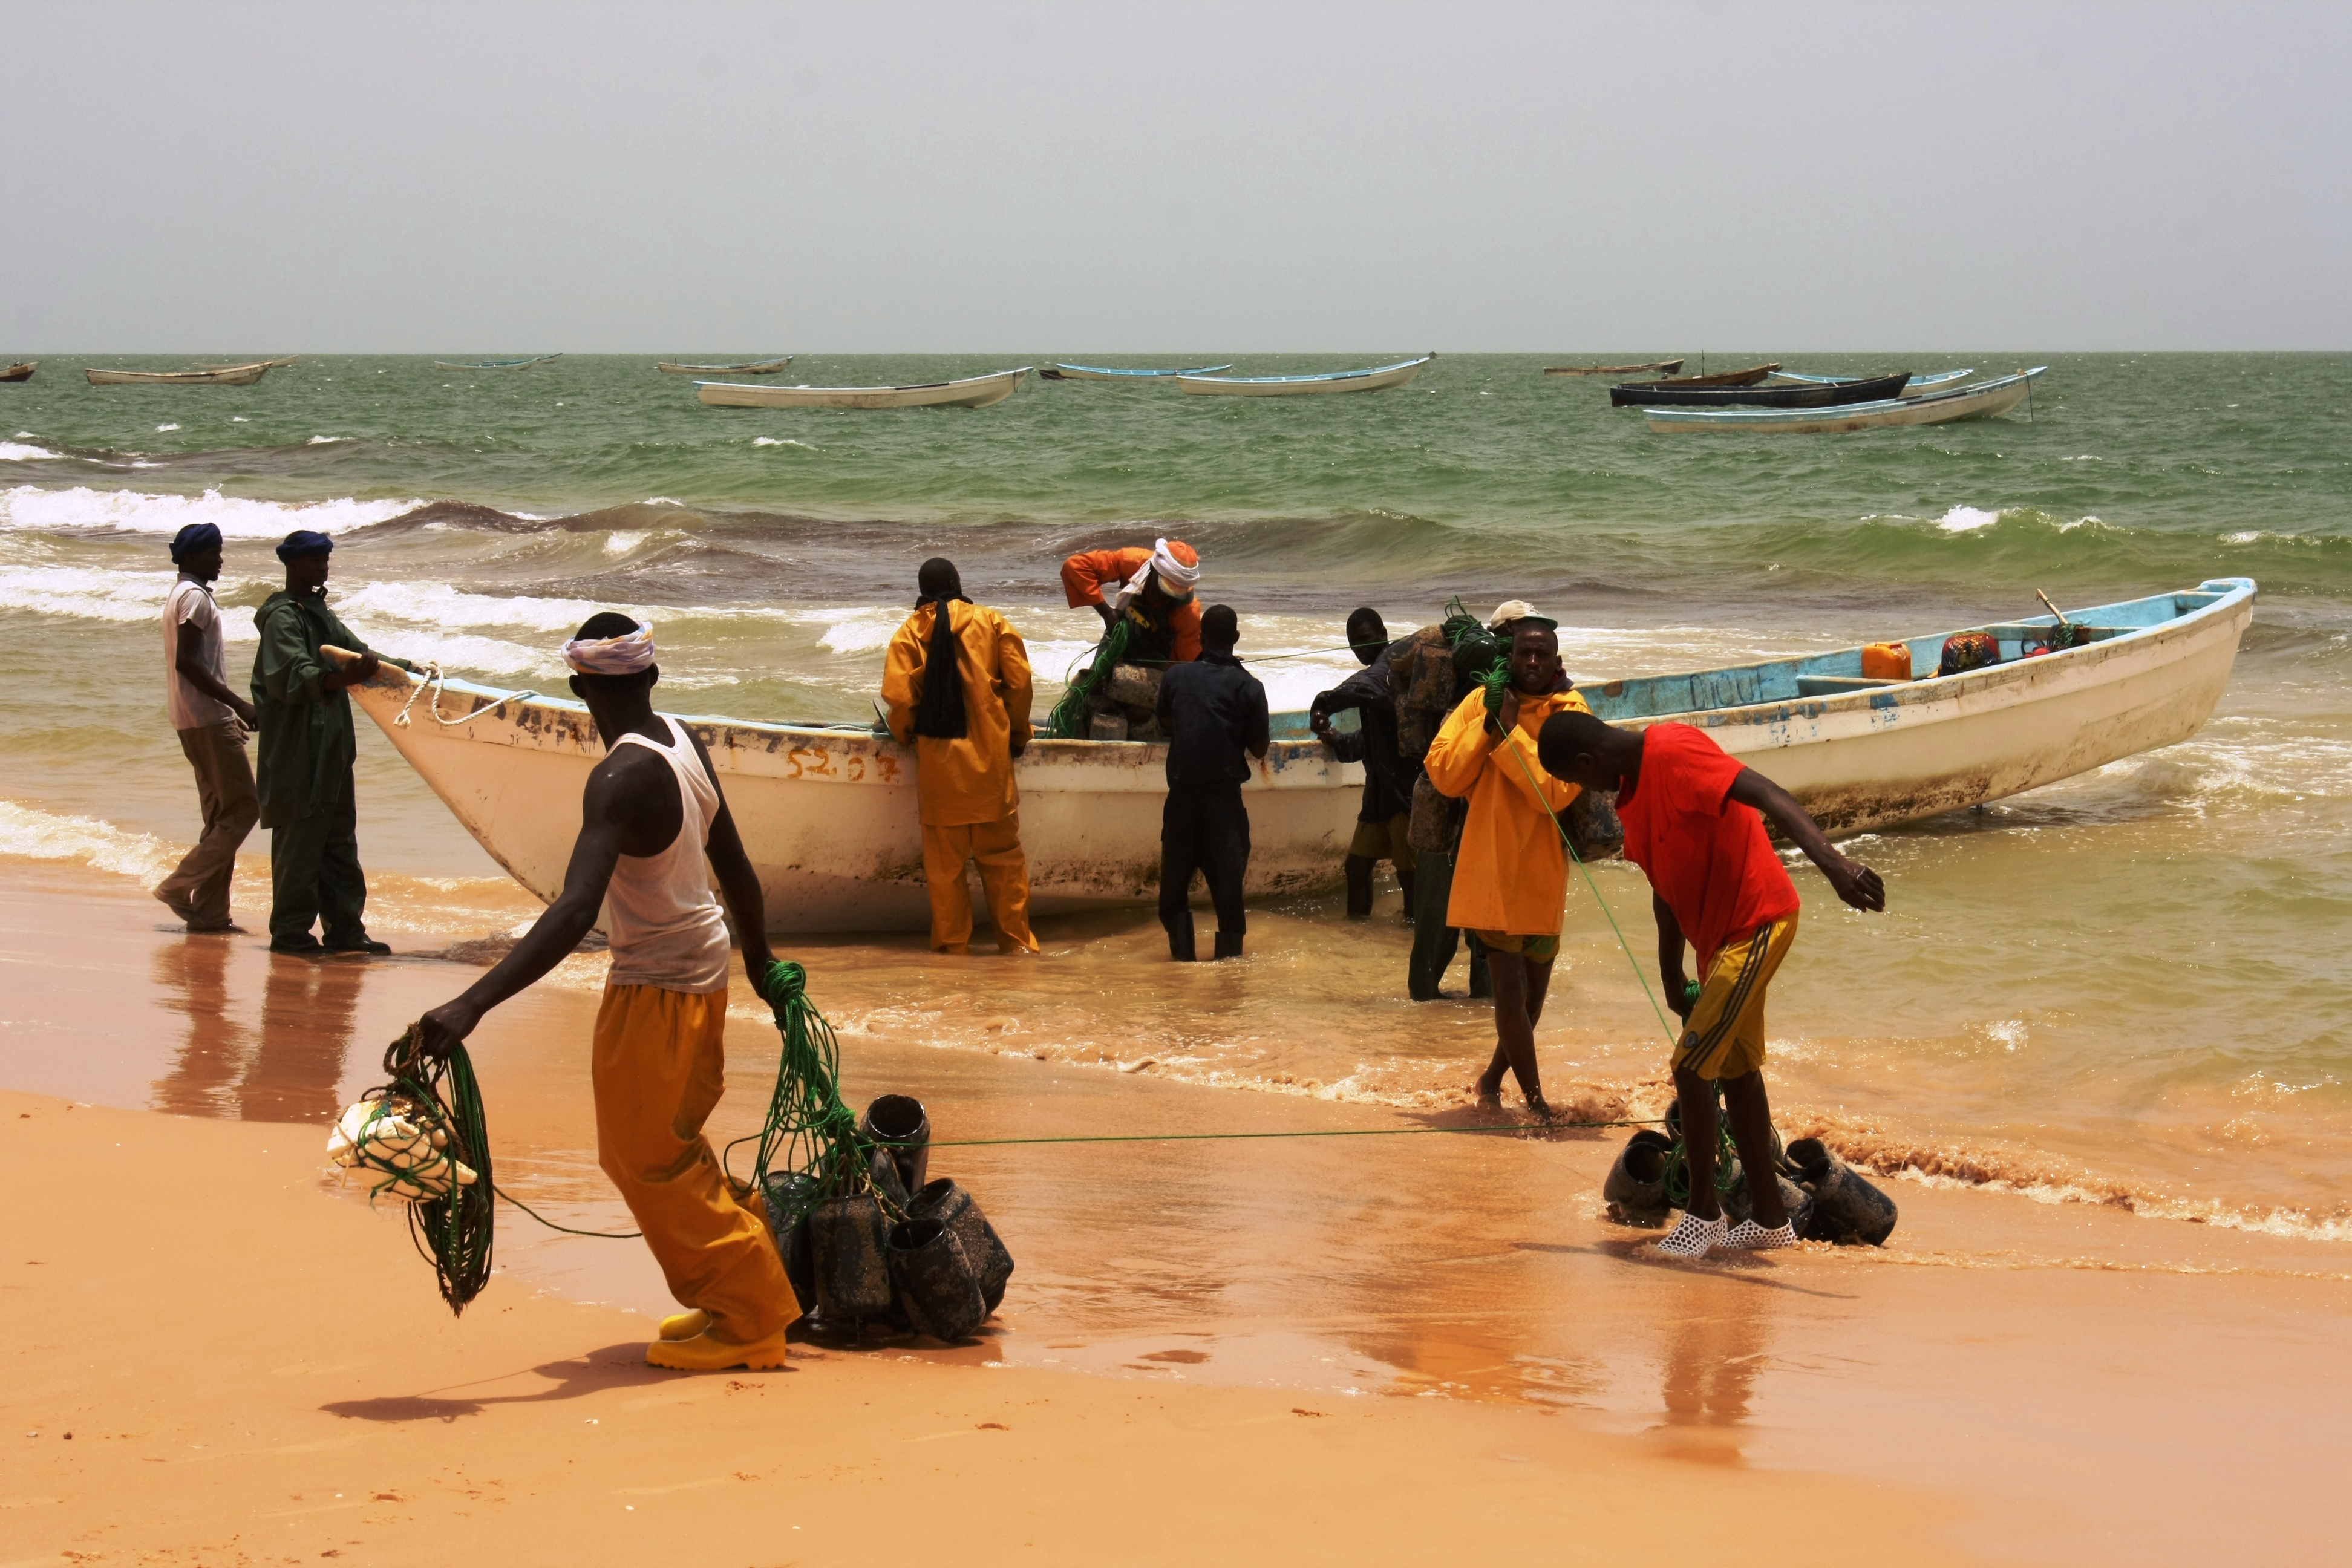 File:Back from octopus fishing - Mauritania.jpg - Wikimedia Commons